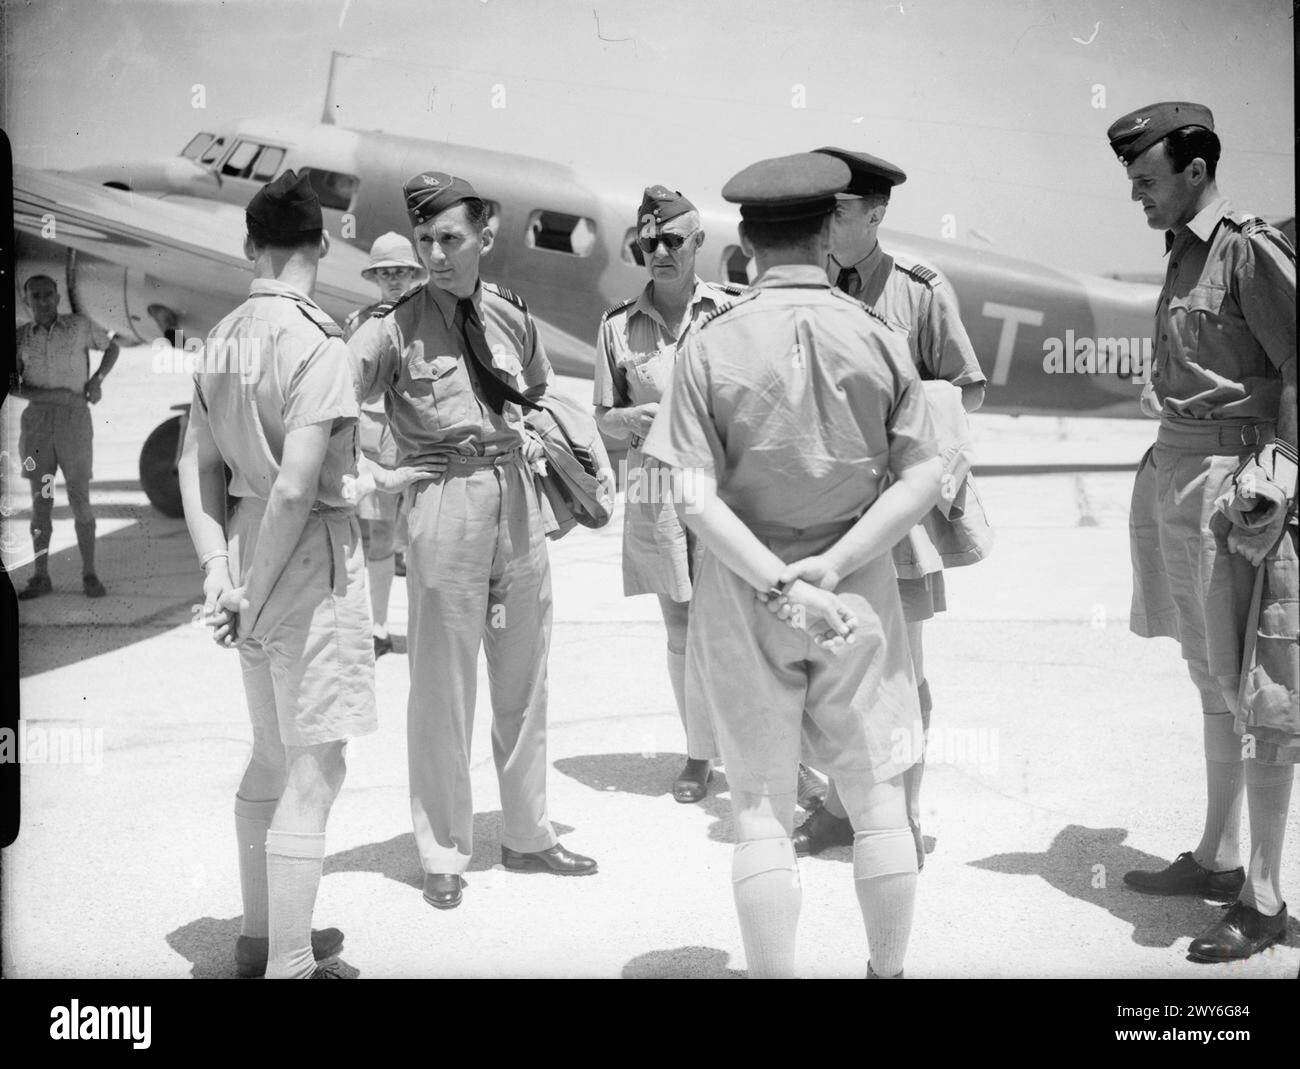 ROYAL AIR FORCE OPERATIONS IN THE MIDDLE EAST AND NORTH AFRICA, 1939-1943. - The new Air Officer Commanding-in-Chief, Middle East Command, Air Marshal A W Tedder (second from left in foreground group), arrives at Lydda, Palestine, to discuss operations in Iraq and Syria with his senior officers. On Tedder's left, wearing sunglasses, is Air Commodore (although still wearing Group Captain's badges of rank) L O Brown, recently appointed Air Officer Commanding, Palestine and Trans-Jordan. At far right stands Squadron Leader G Bray, Tedder's Personal Assistant Staff Officer. Tedder's aircraft, behi Stock Photo